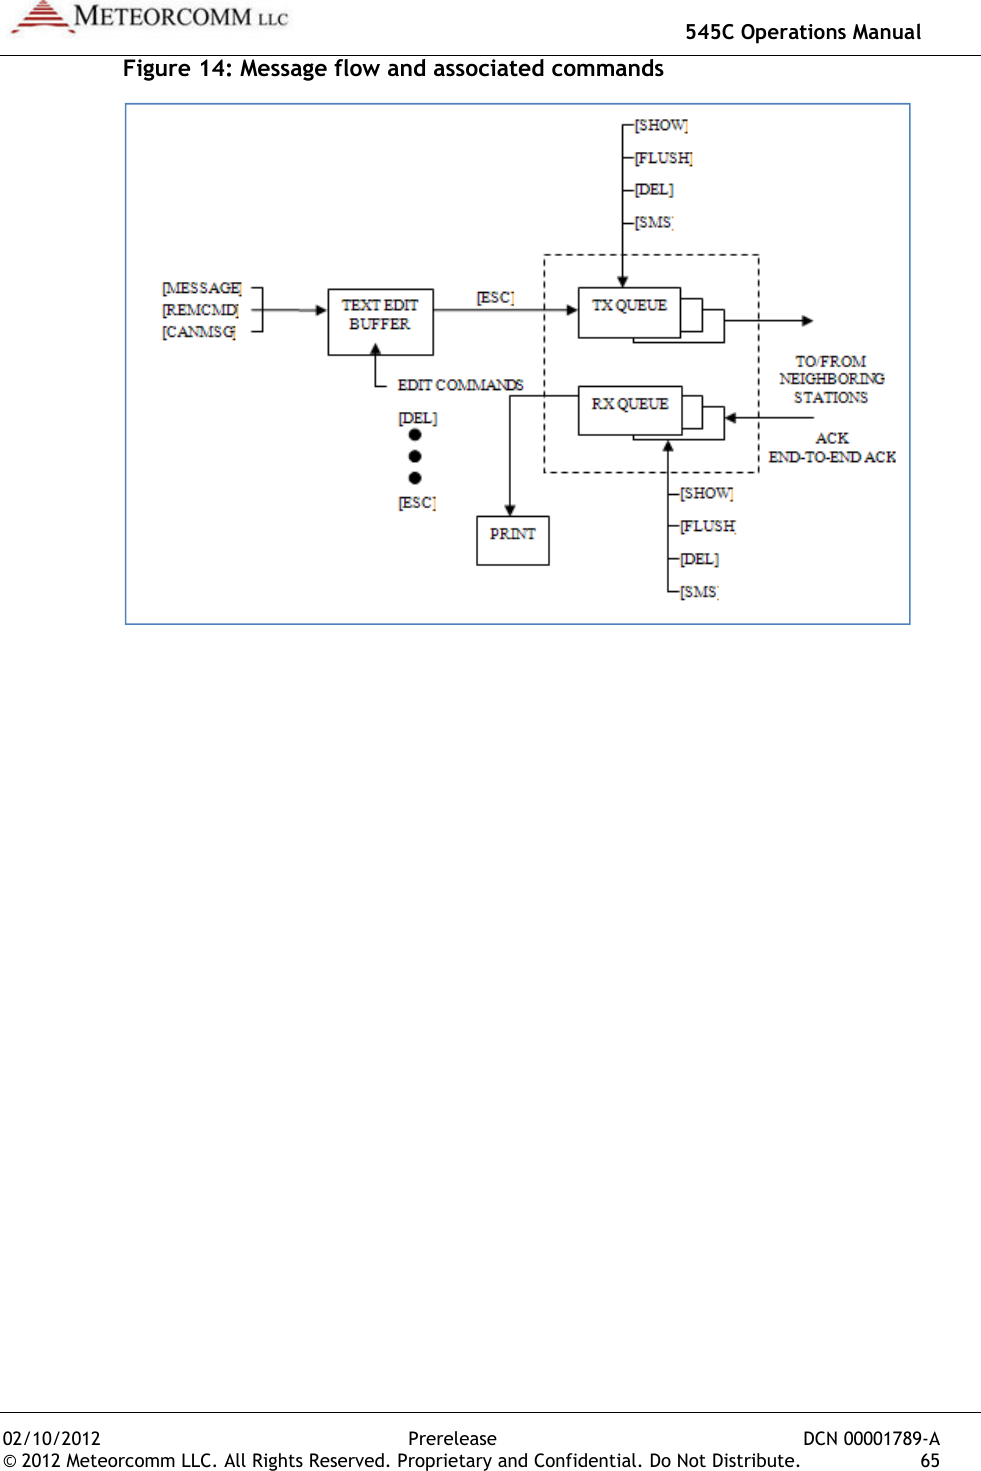   545C Operations Manual 02/10/2012  Prerelease  DCN 00001789-A © 2012 Meteorcomm LLC. All Rights Reserved. Proprietary and Confidential. Do Not Distribute.  65 Figure 14: Message flow and associated commands    